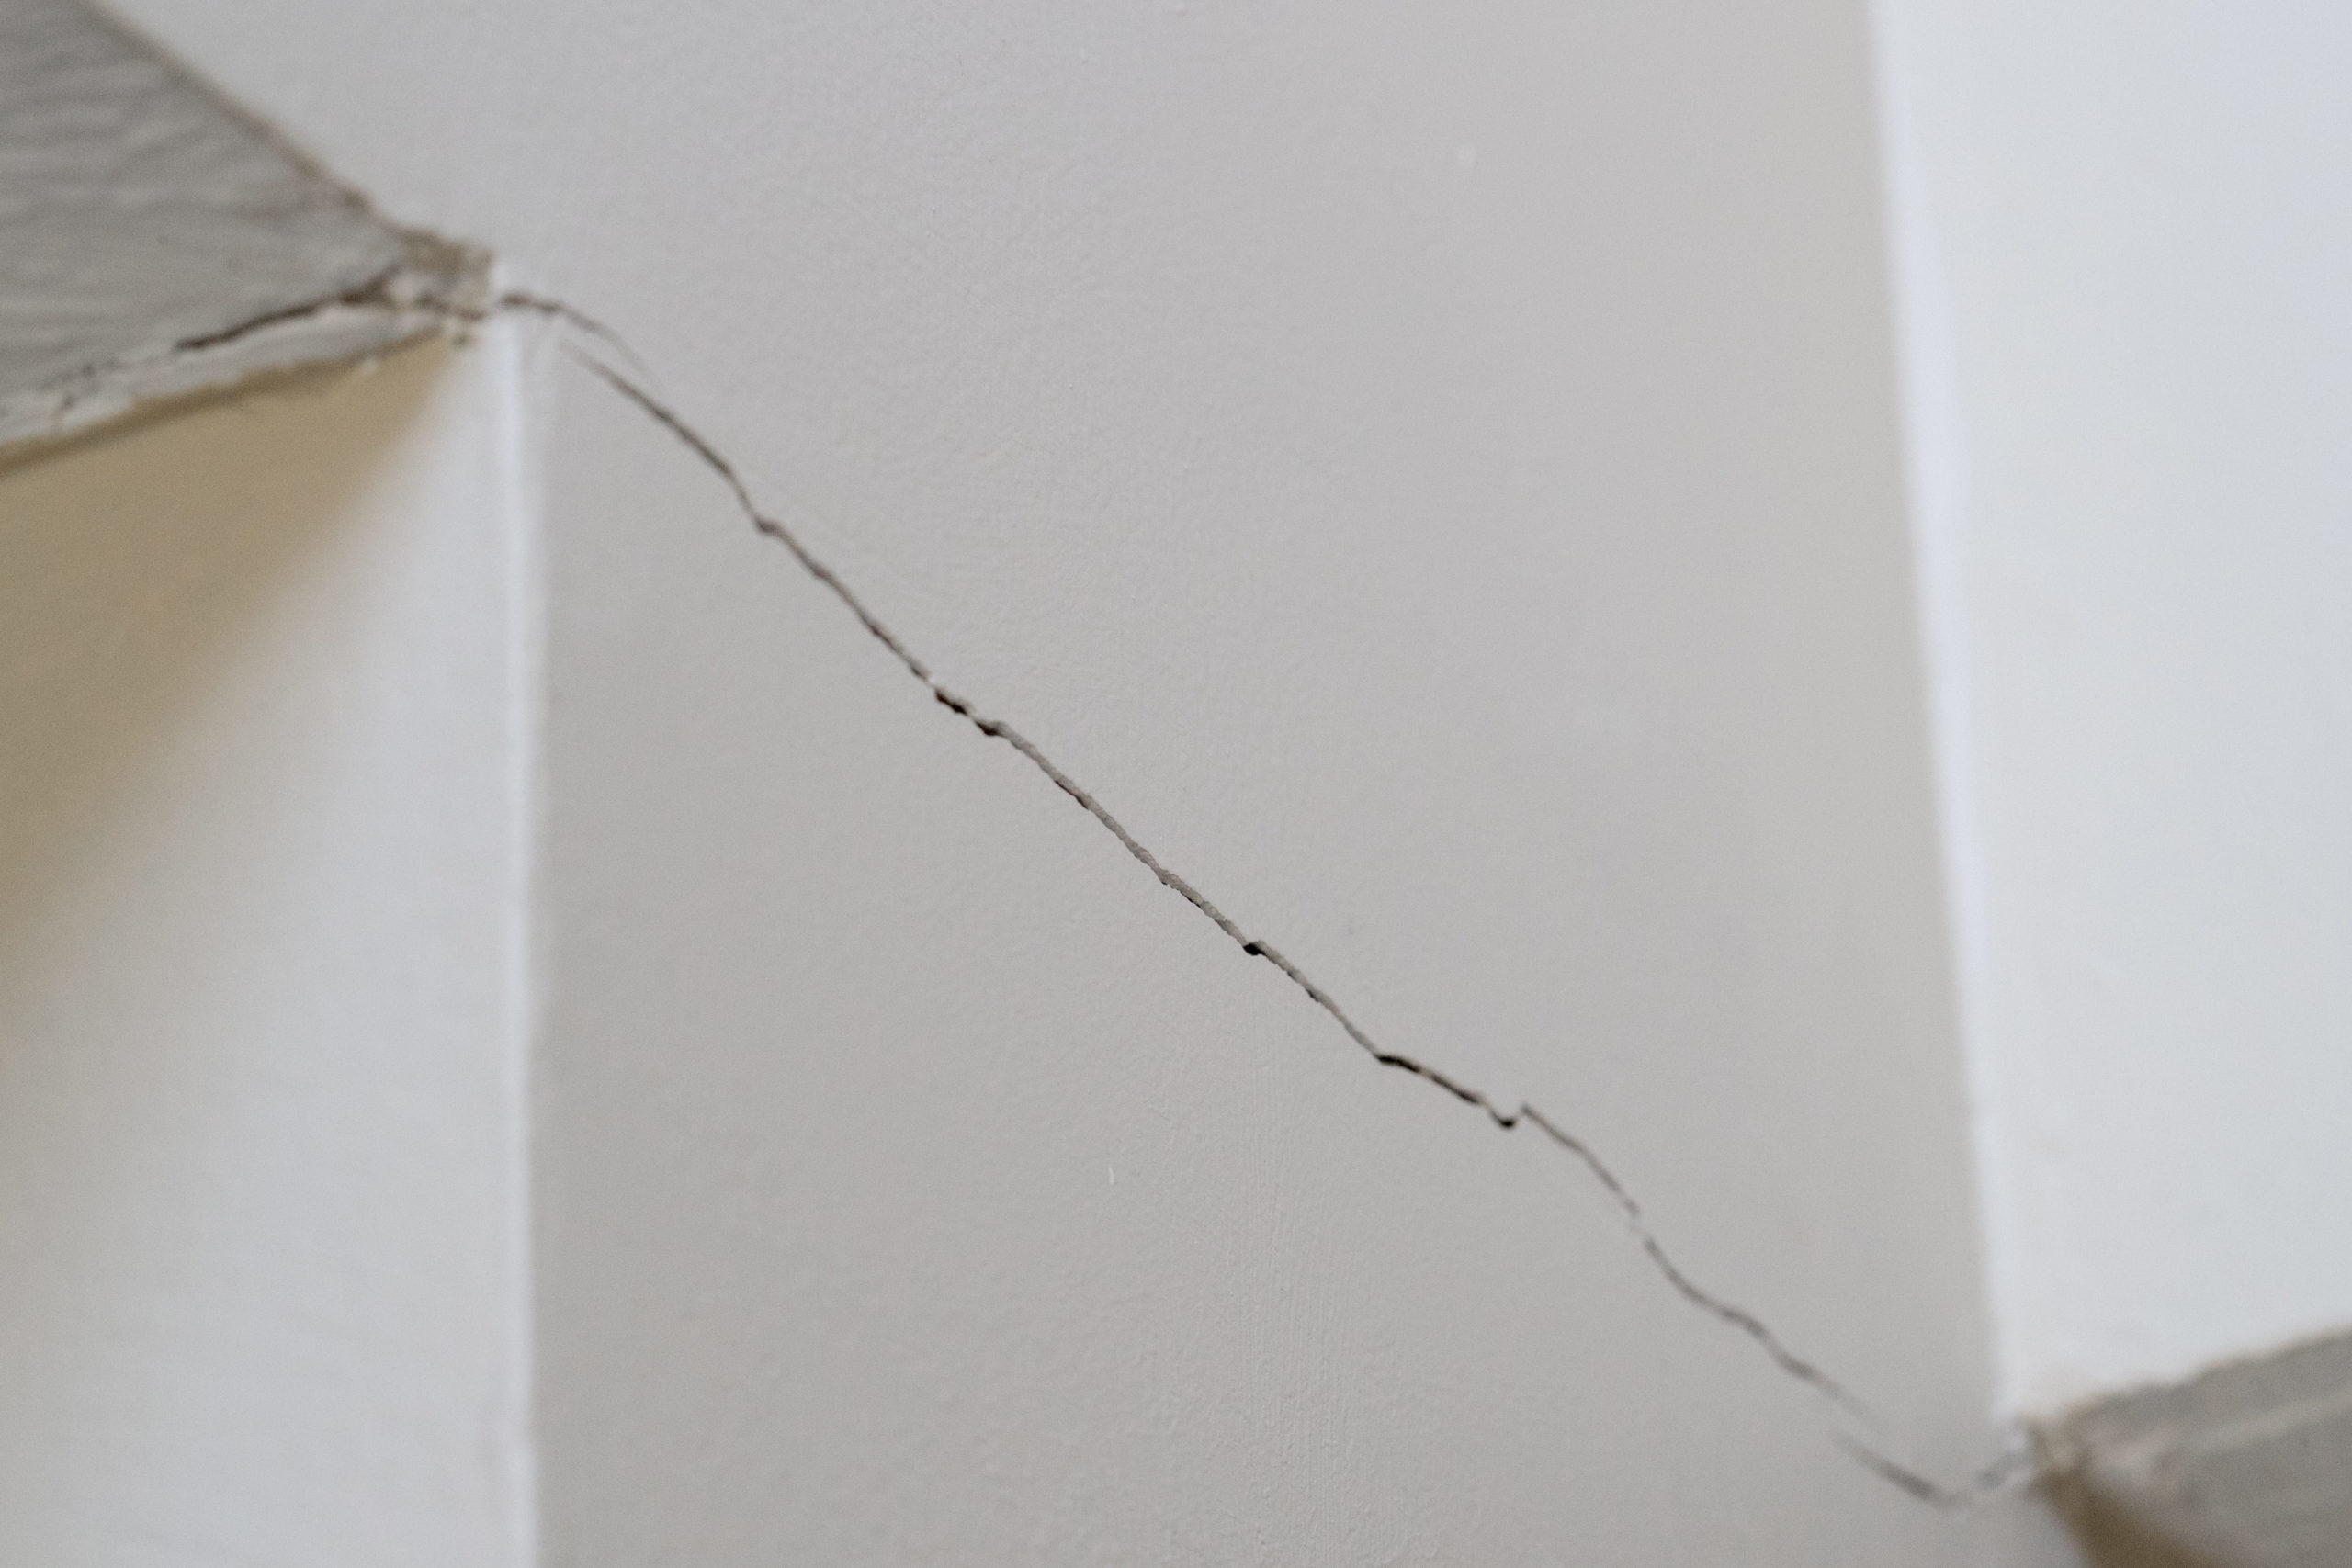 Foundation Crack Repair in South Texas  Reasons for Foundation Cracks